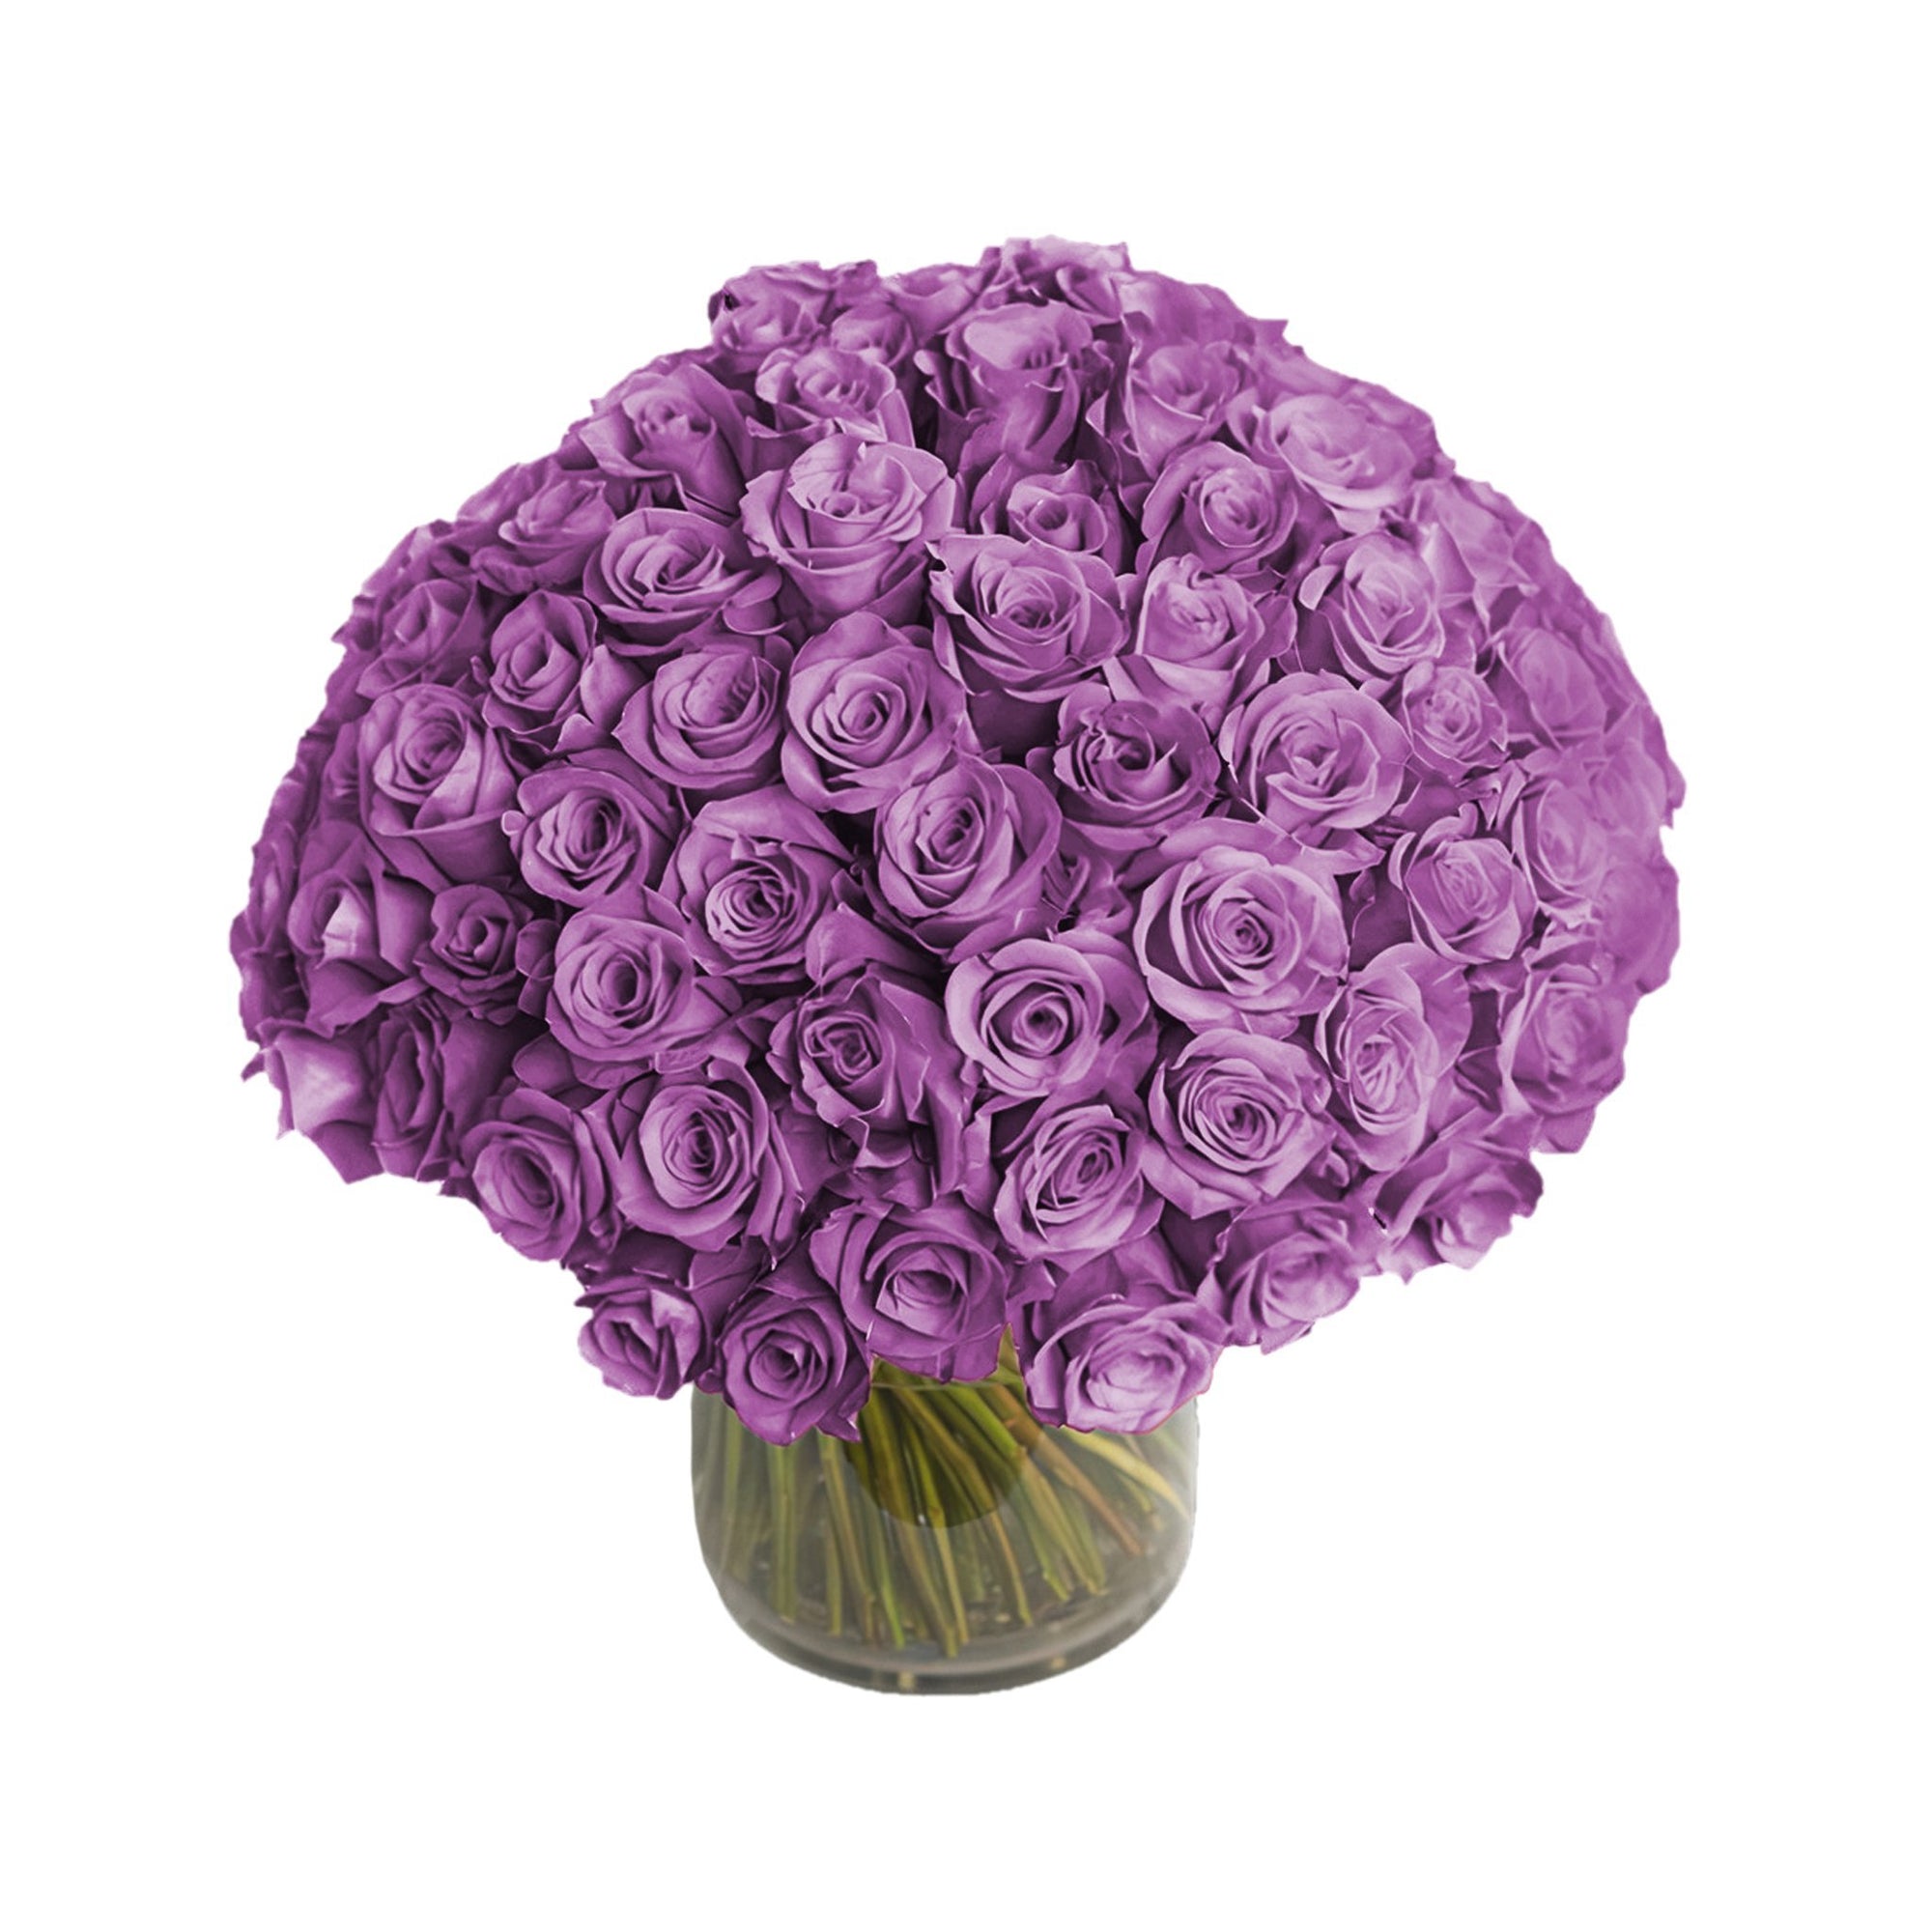 Manhattan Flower Delivery - Fresh Roses in a Vase | 100 Purple Roses - Roses